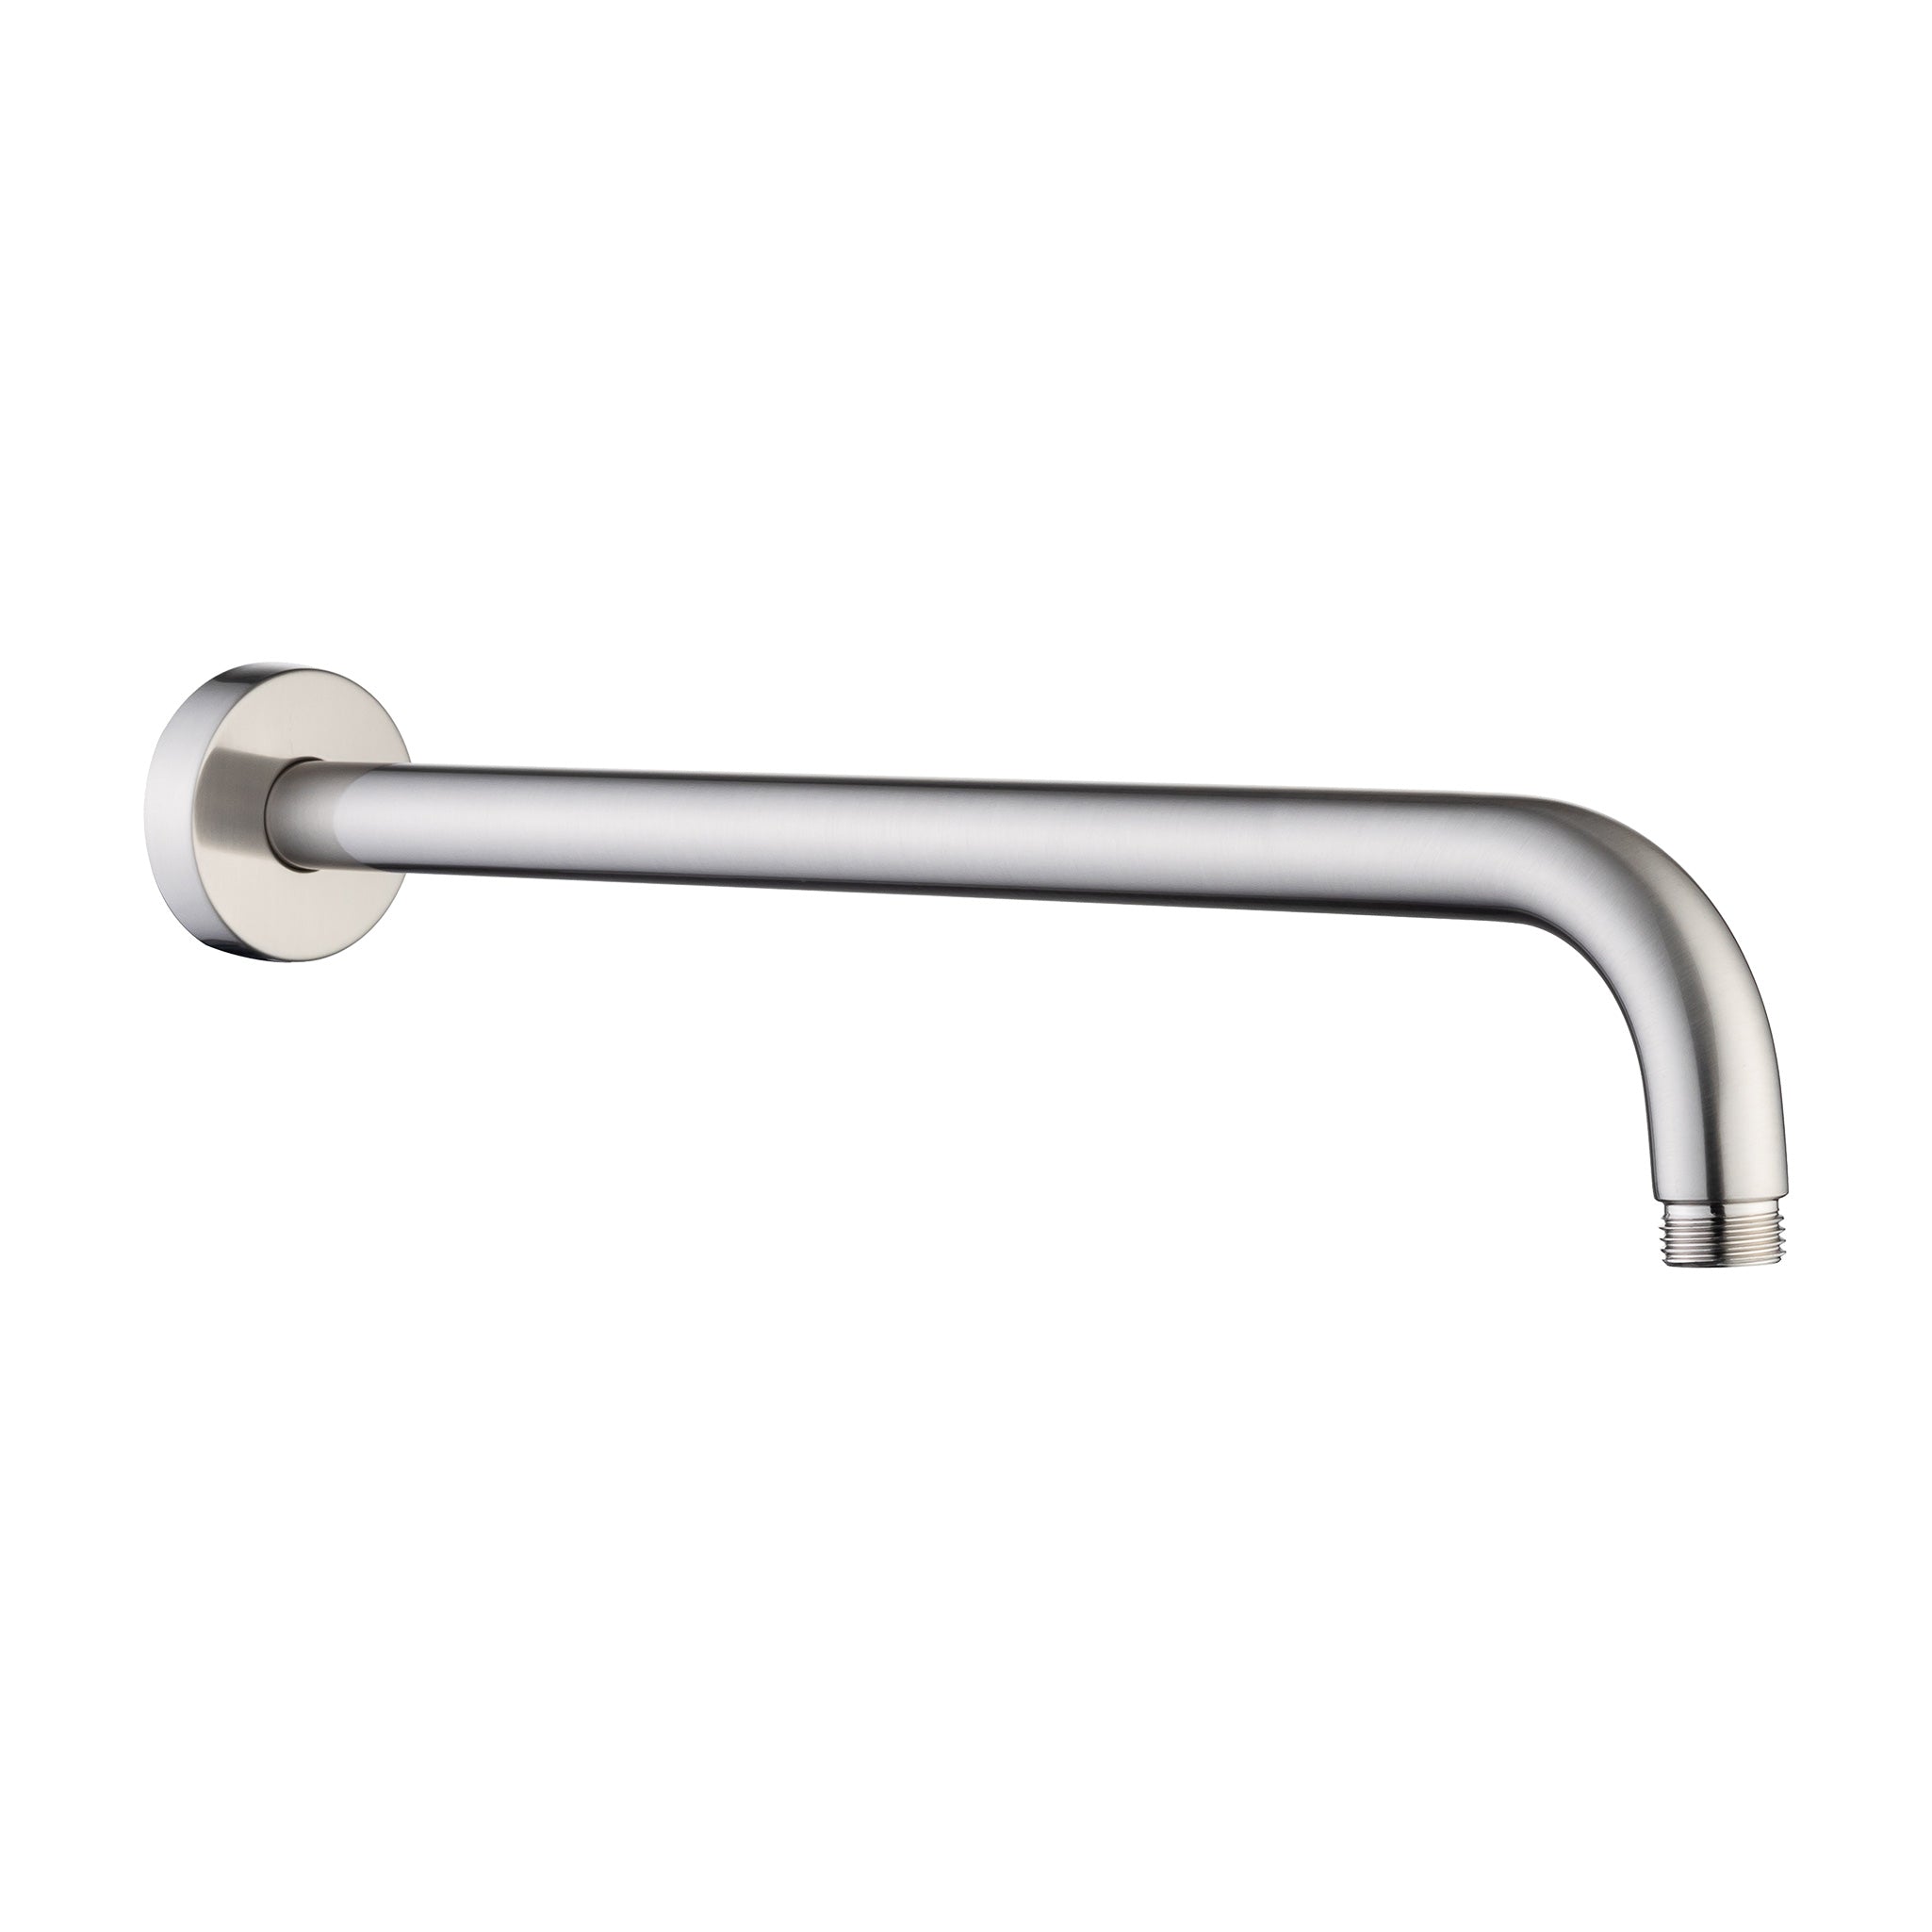 16'' Round Wall Mount Shower Arm With Flange L2-16